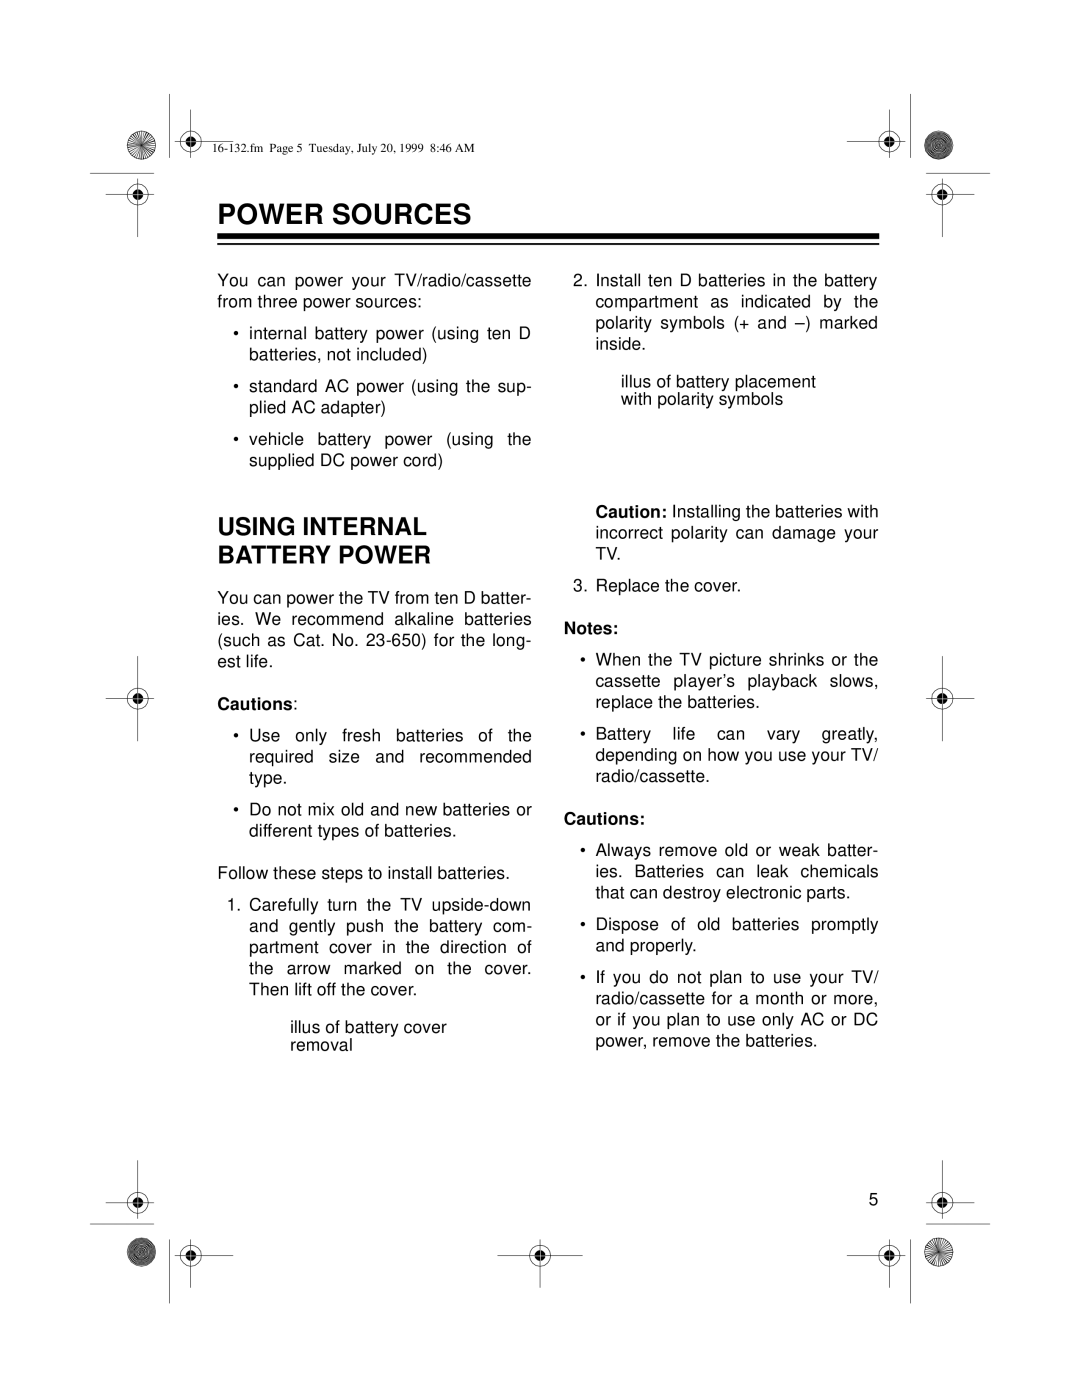 Optimus 16-132 owner manual Power Sources, Using Internal Battery Power 